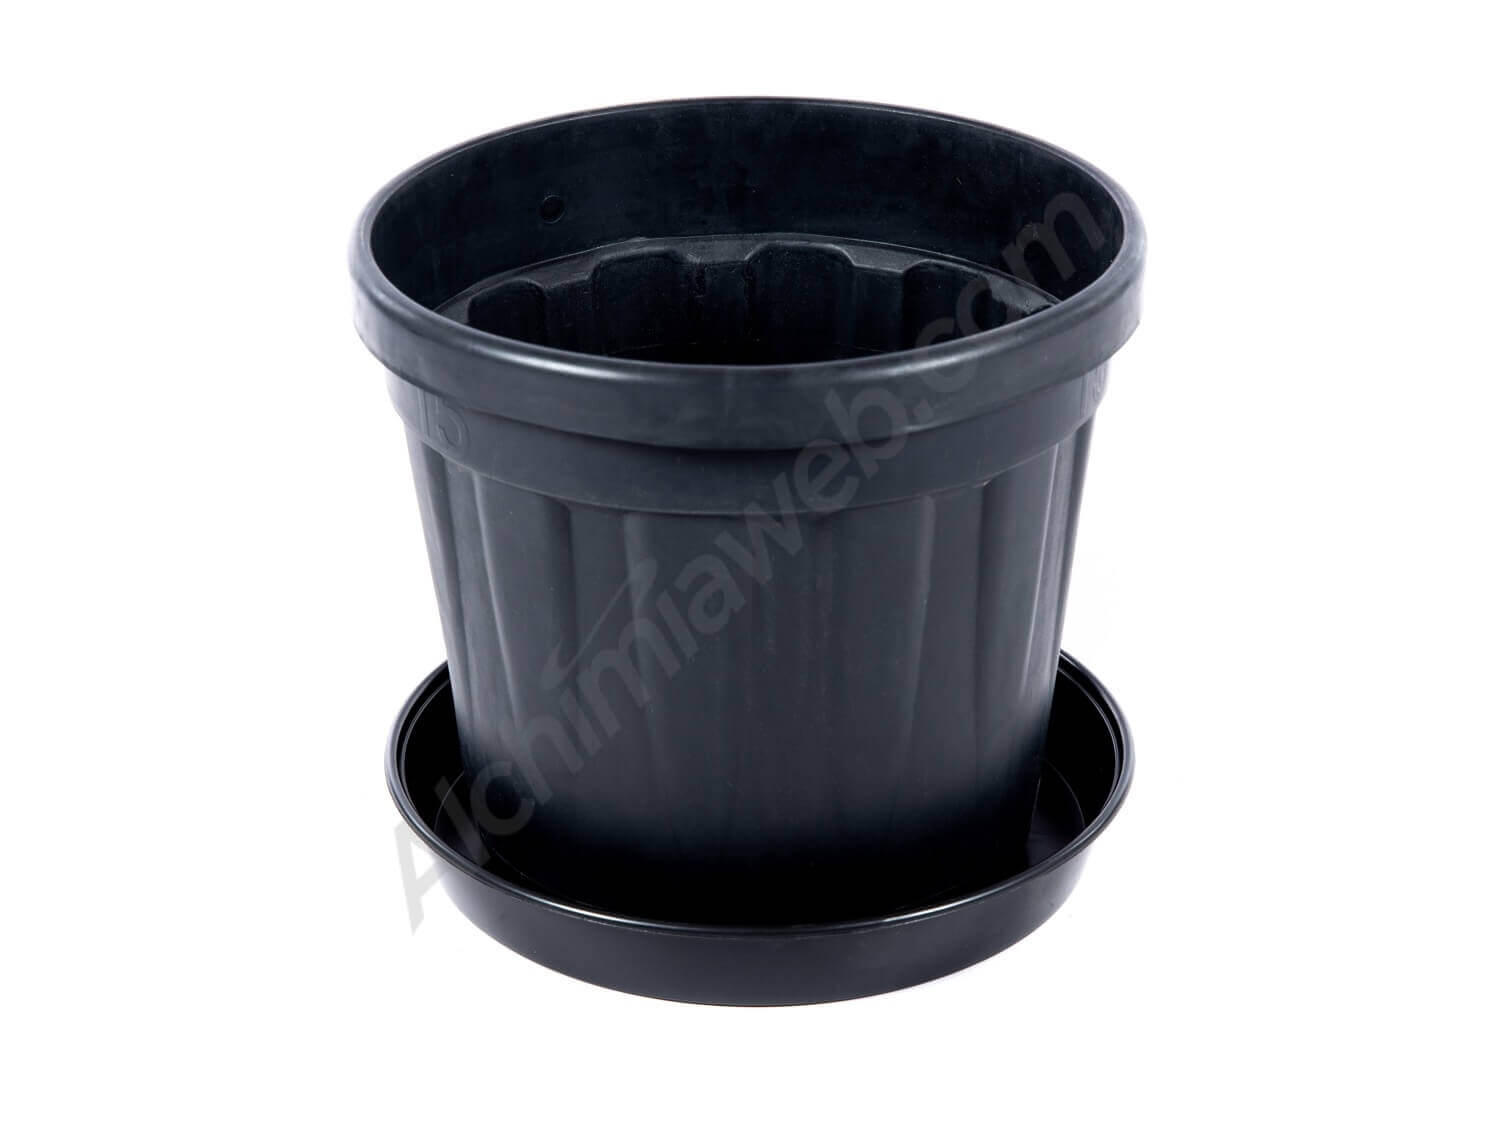 Fenice Black Round Pot with Saucer